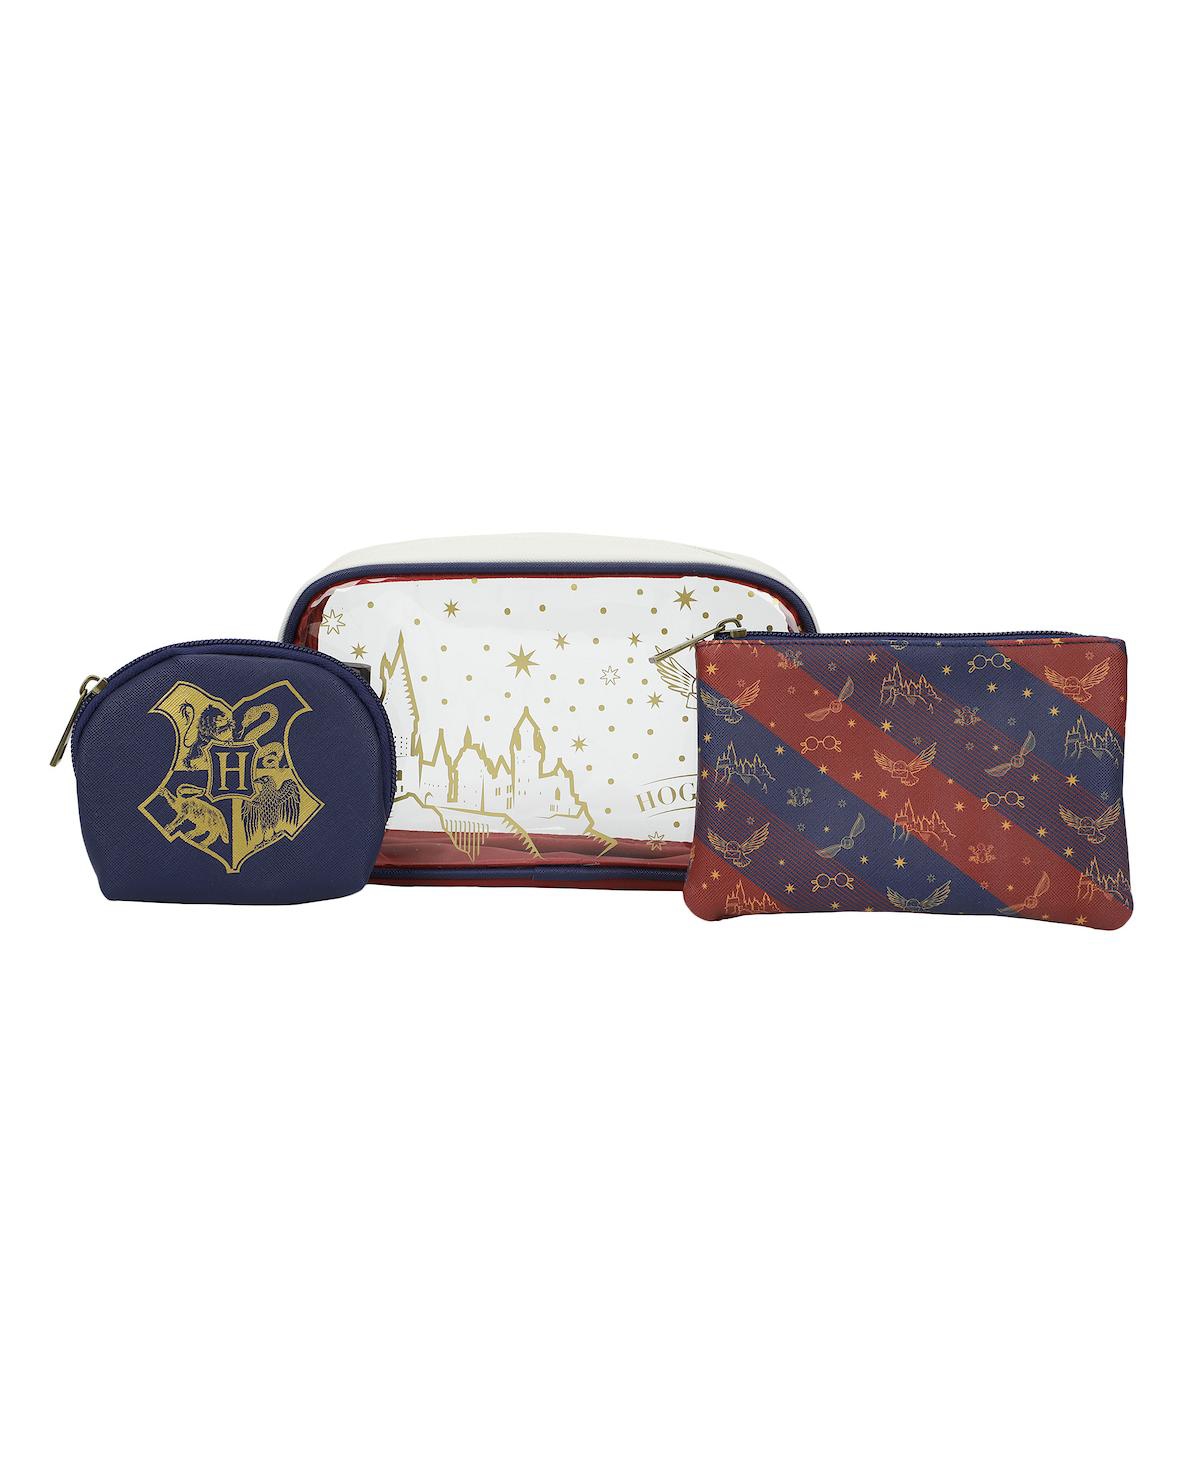 Hogwarts Travel Cosmetic Bags - Set of 3 - Multicolored